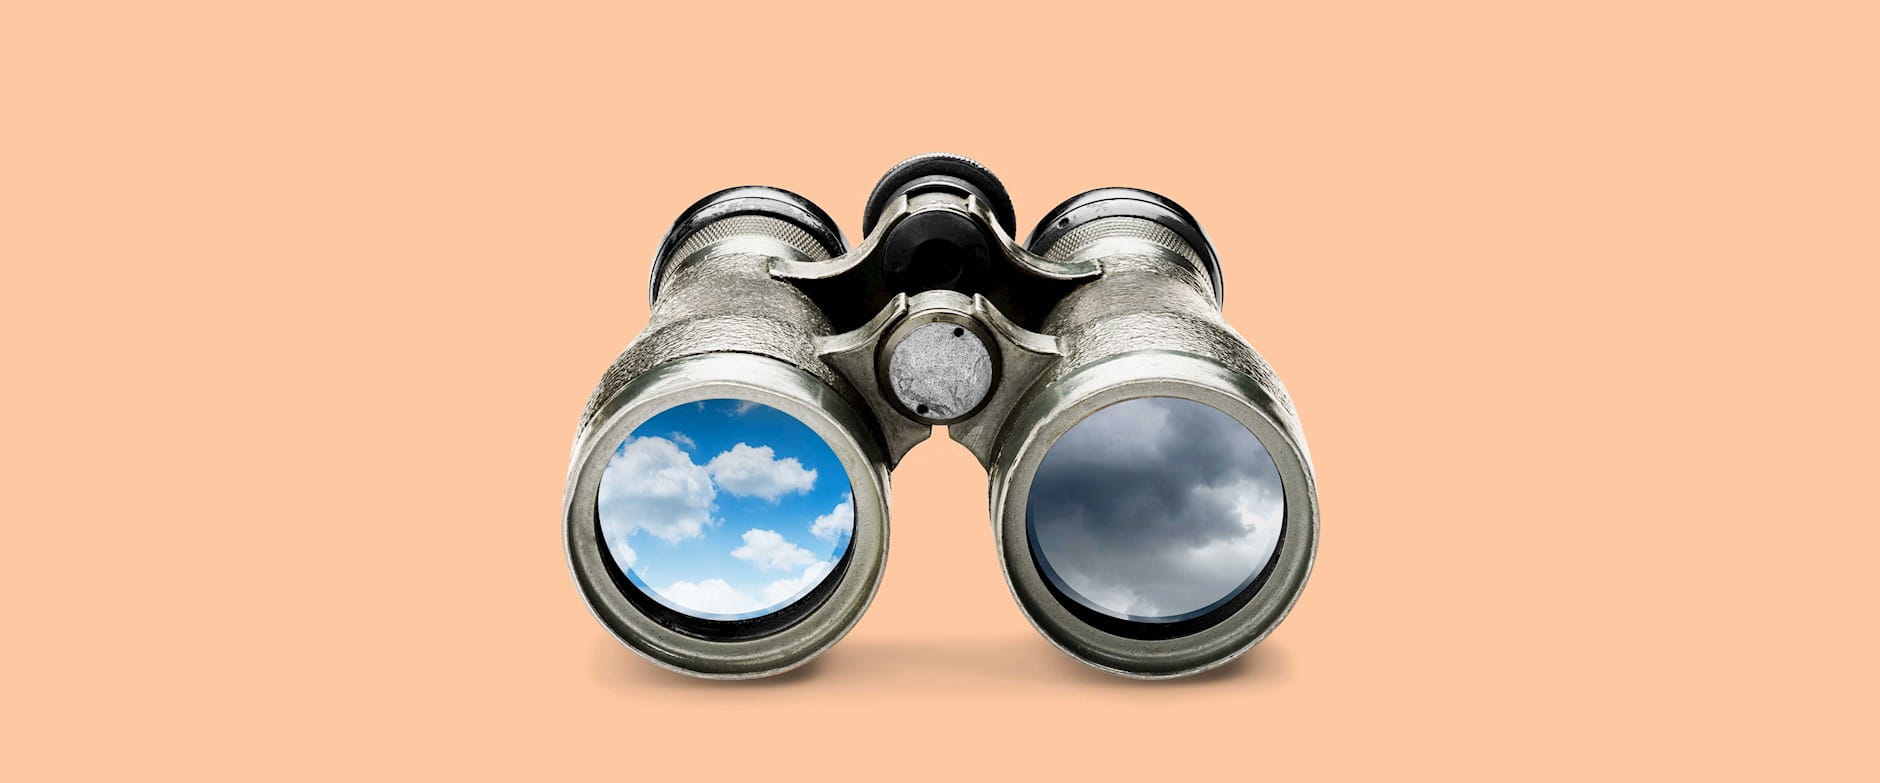 Binoculars with a blue sky reflected in one lens and a stormy sky in the other